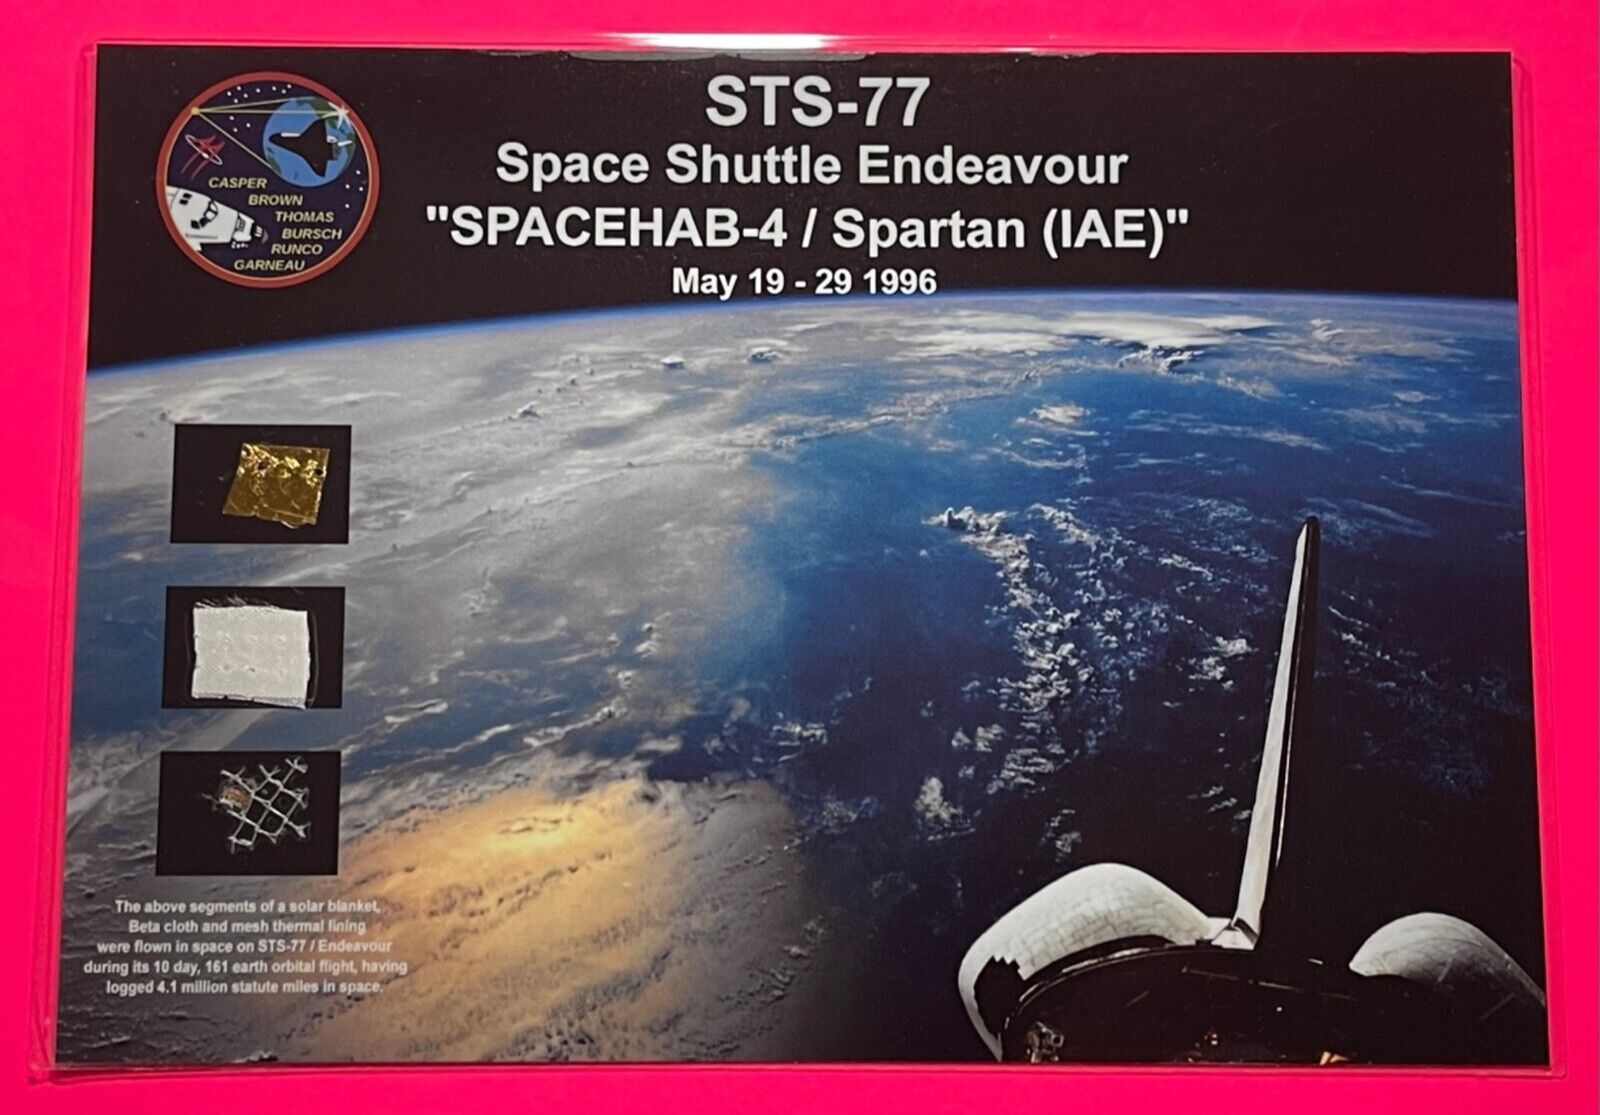 STS-77 SPACEHAB-4 MISSION FLOWN IN SPACE 3 RELIC\'S ARTIFACT\'S 6 X 8.5 CARD